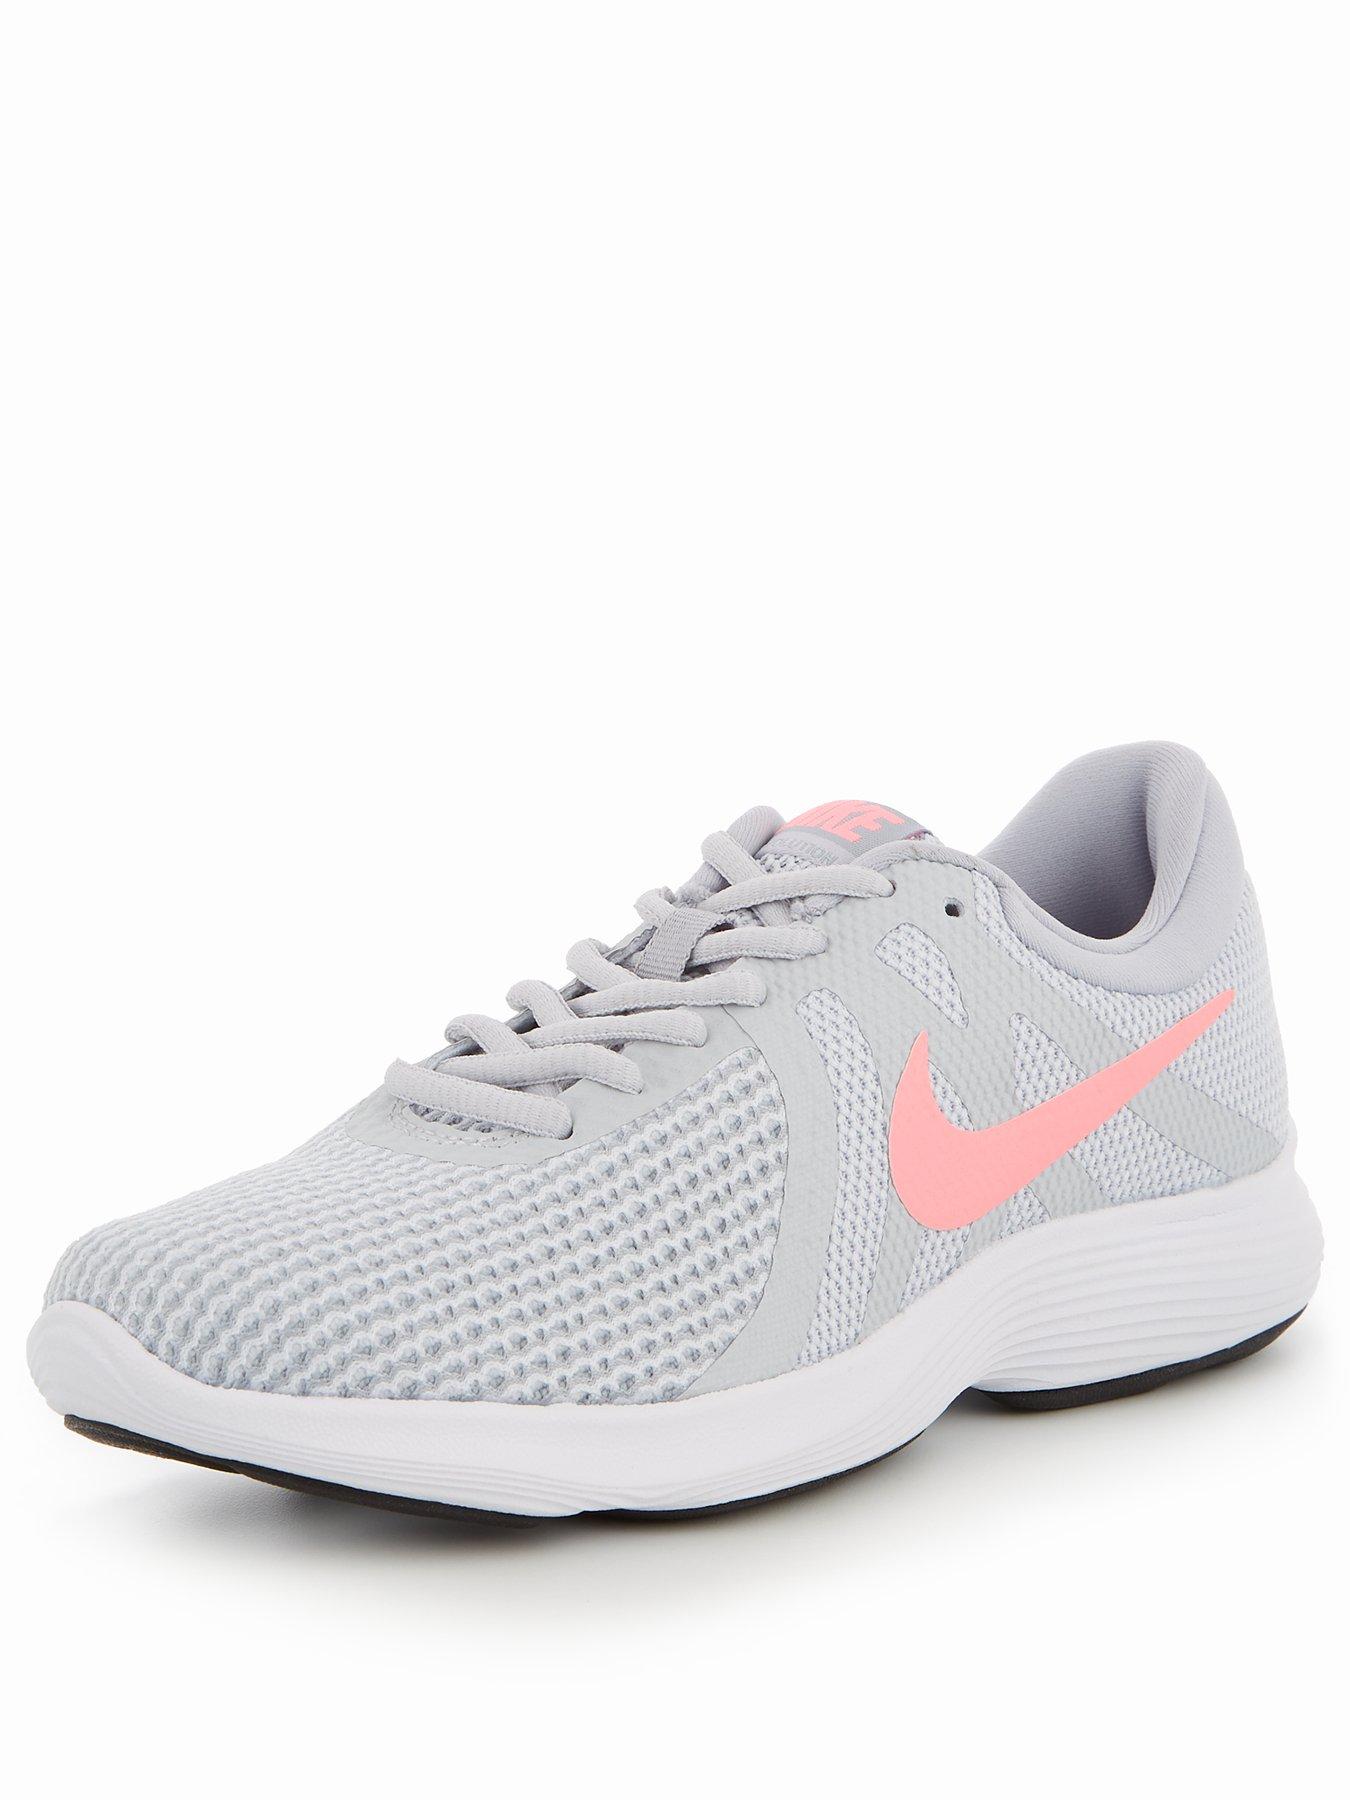 nike gray and pink